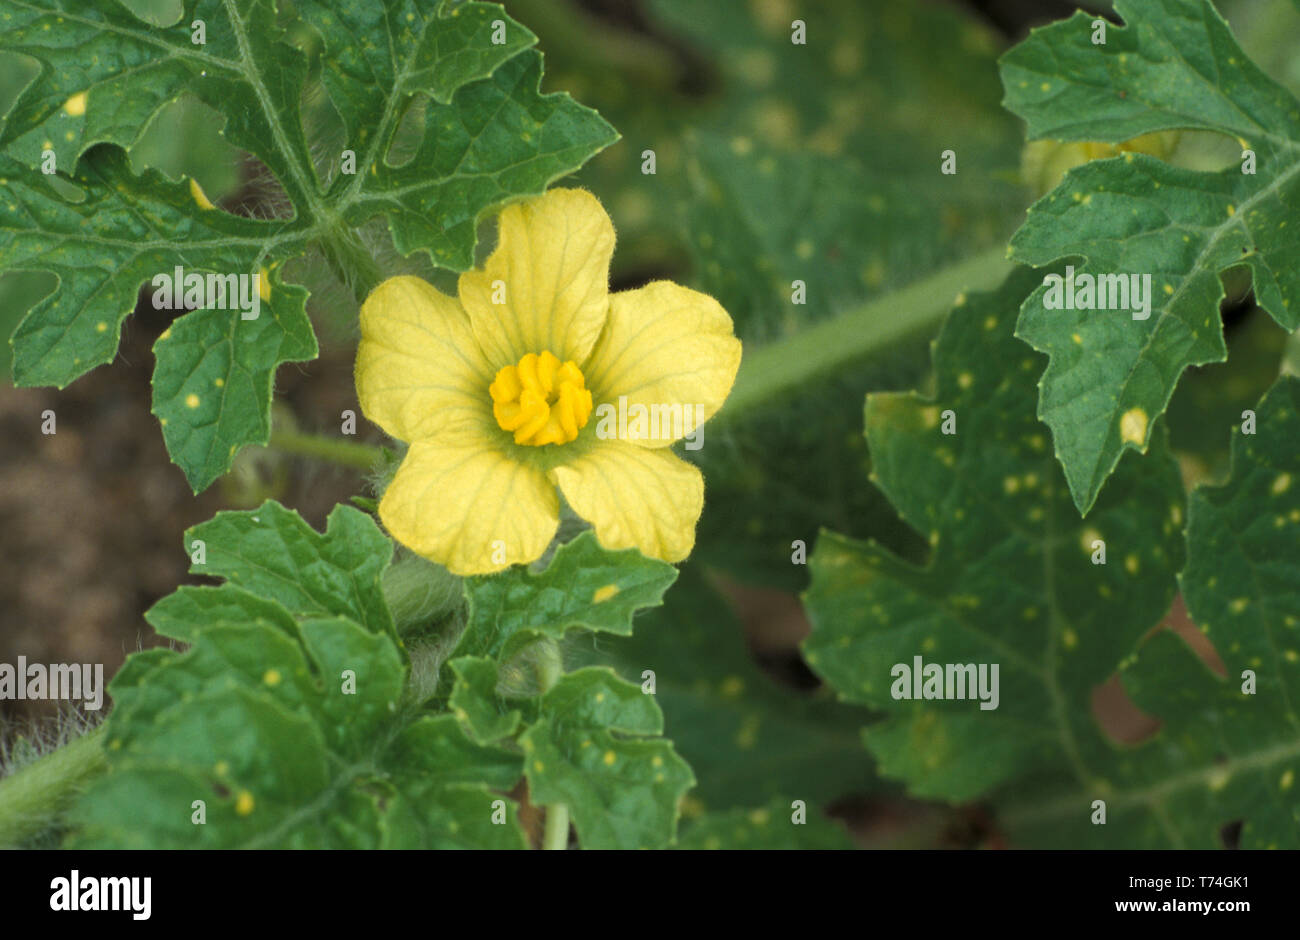 MALE FLOWER AND LEAVES OF THE WATERMELON (CITRULLUS LANATUS) 'MOON AND STARS' Stock Photo